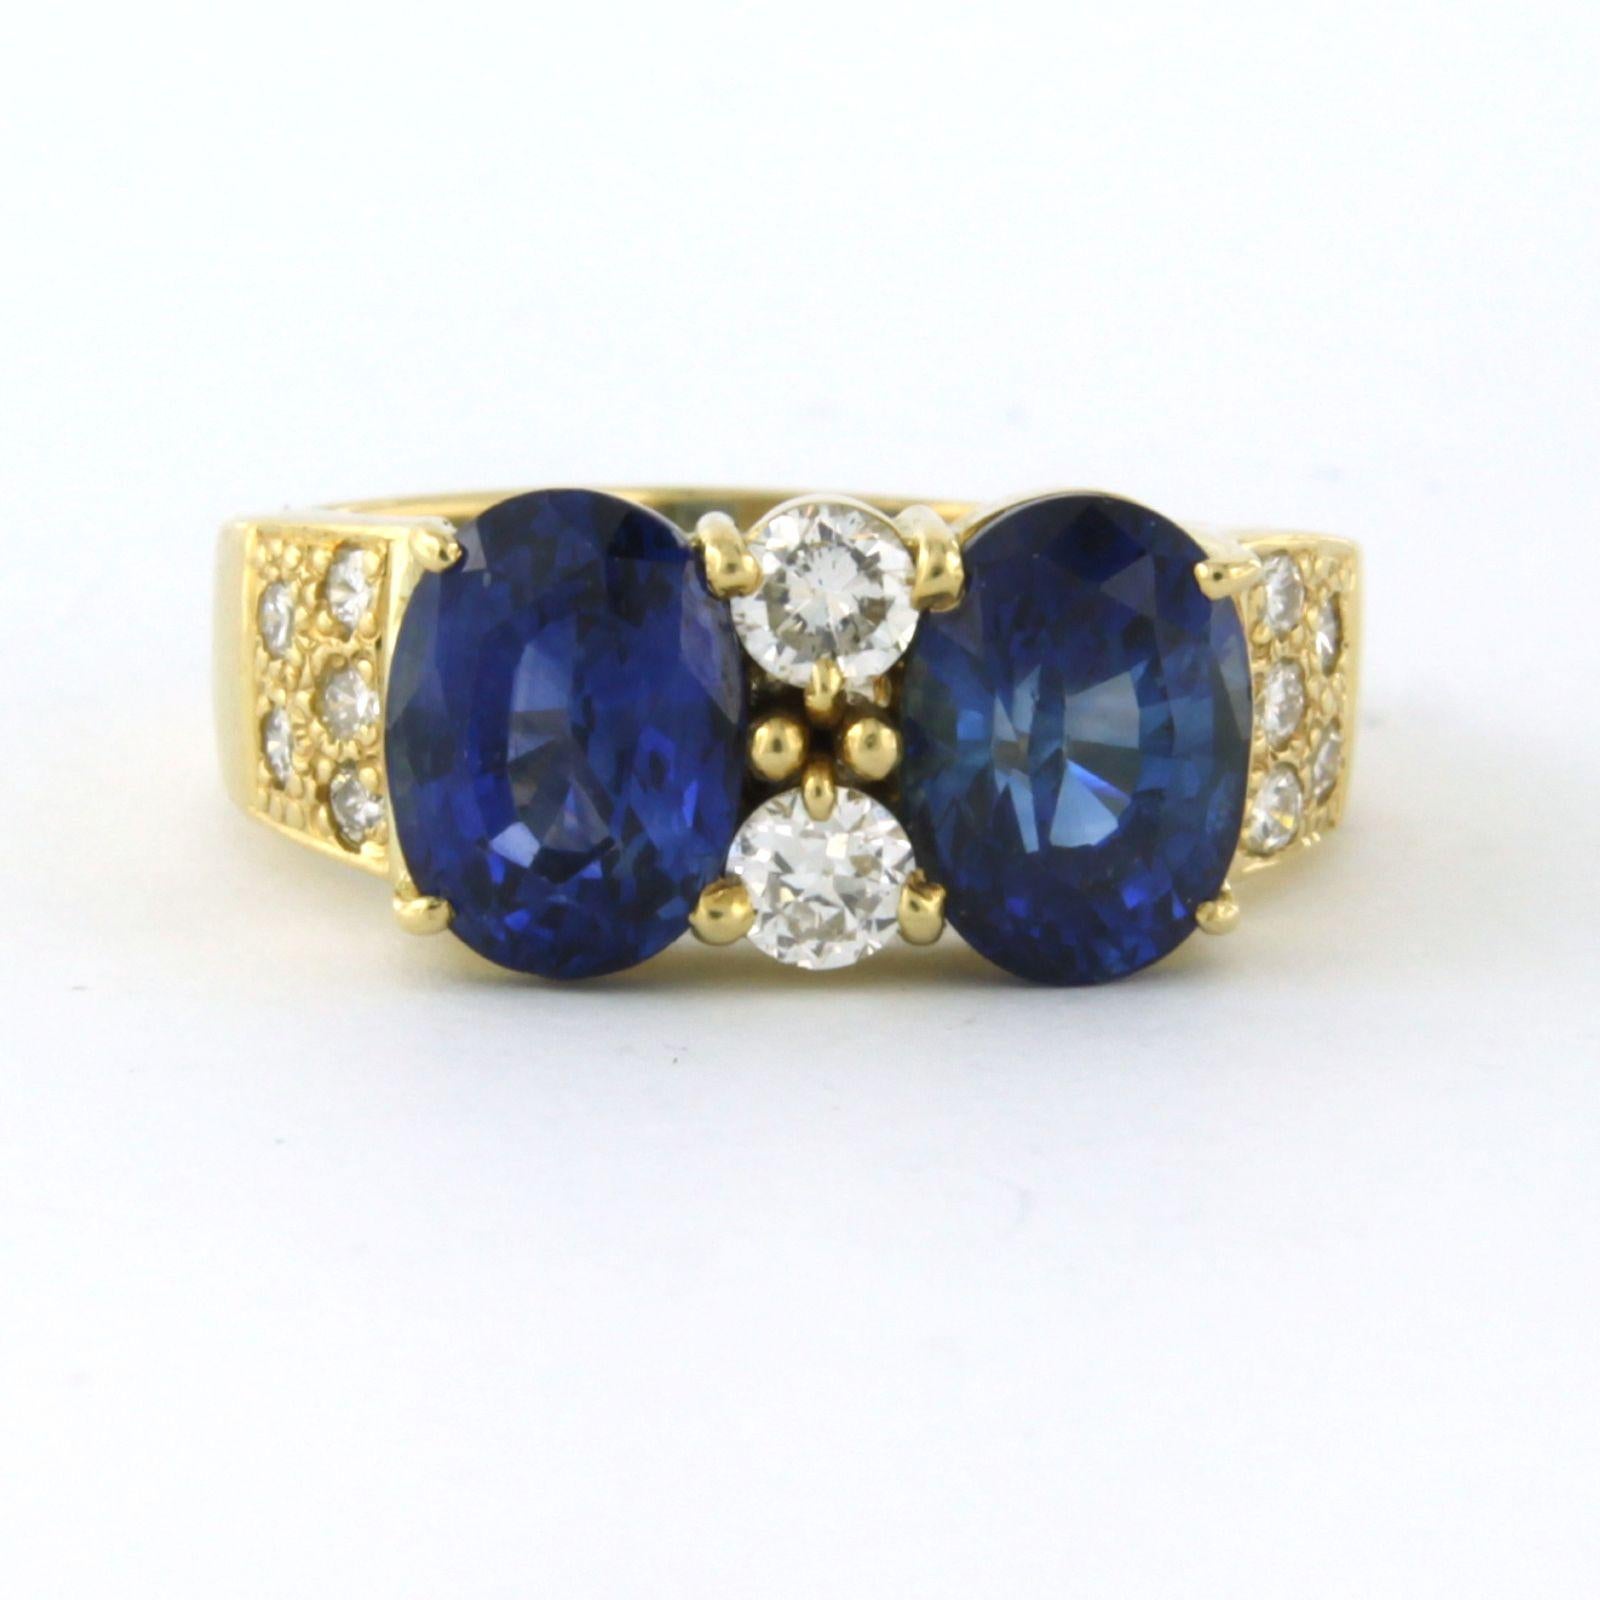 18k yellow gold ring set with sapphire 3.00 ct and brilliant cut diamond 0.50 ct - F/G - VS/SI - ring size U.S. 6.5 - EU. 17 (53)

detailed description:

The ring is 8.5 mm wide

ring size US 6.5 - EU. 17 (53), ring can be reduced in size free of